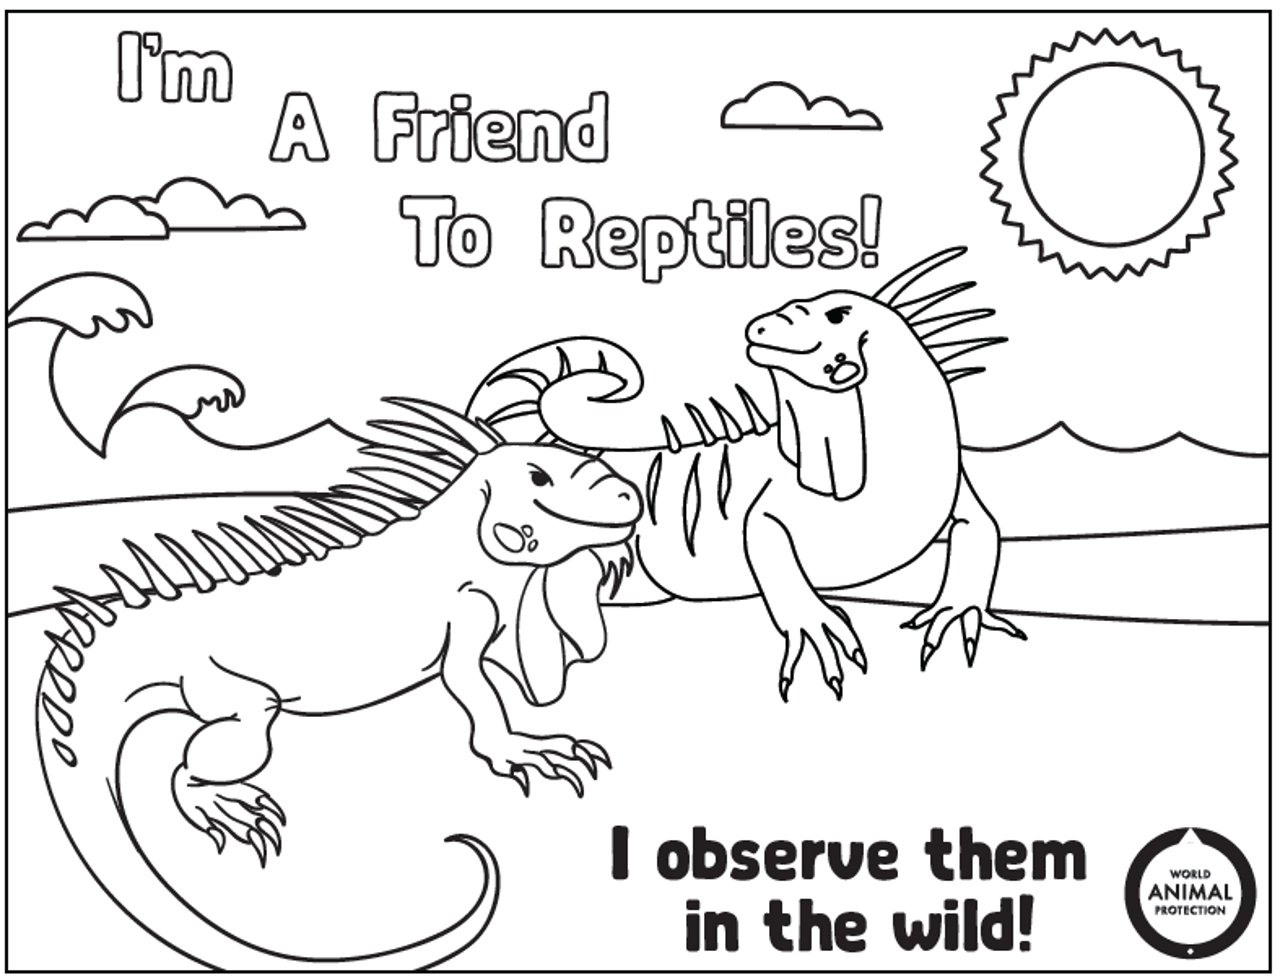 a page of the wildlife not pets kids activity book